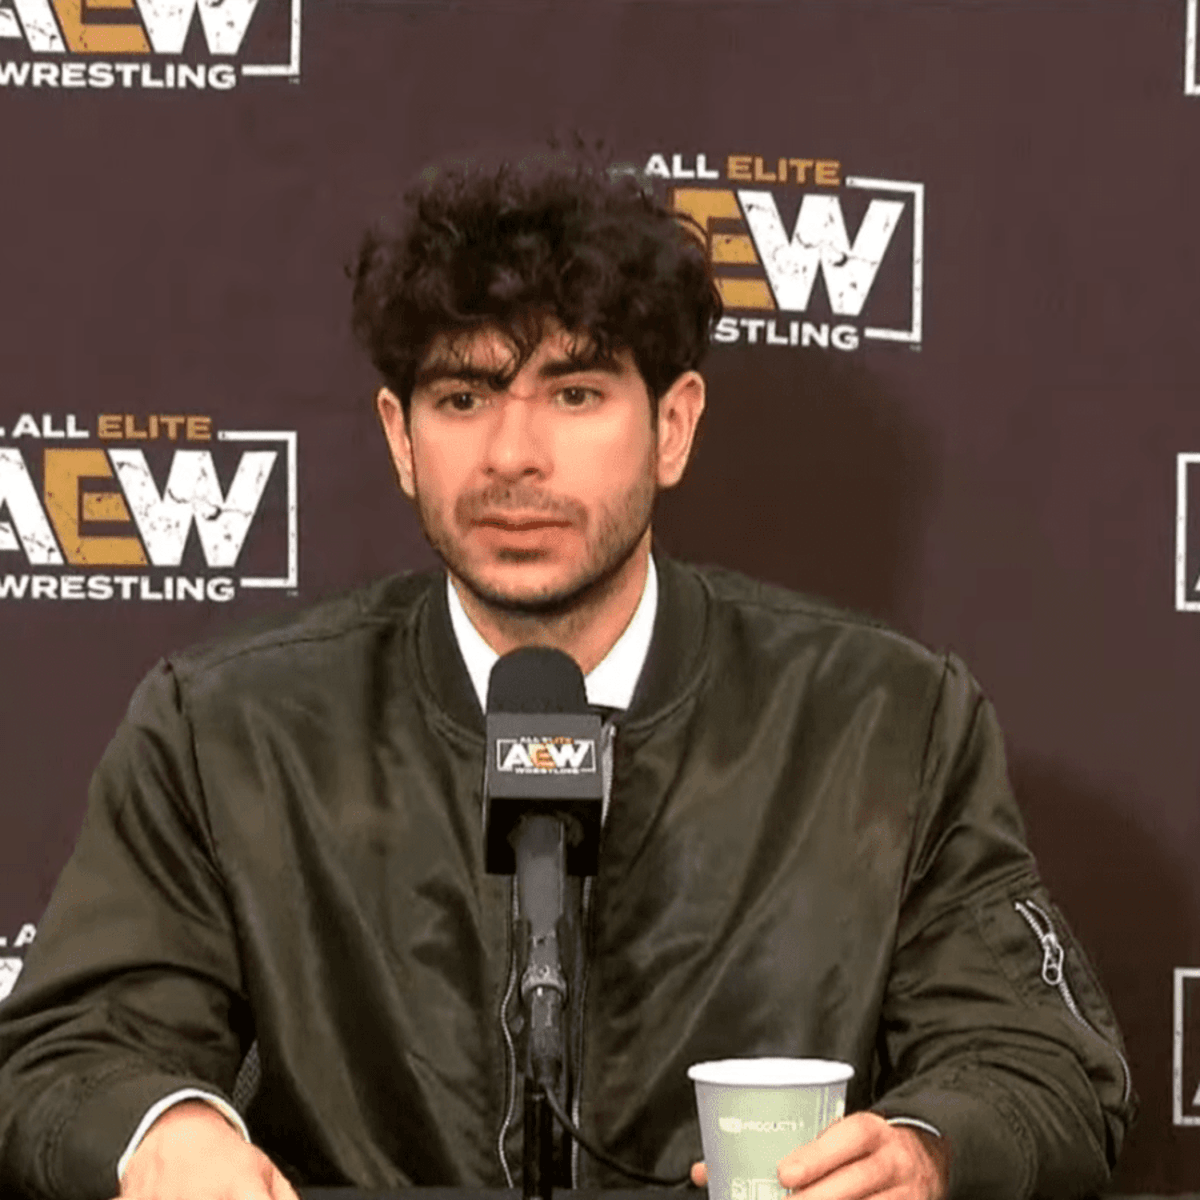 WWE Sale: AEW Chief Tony Khan Shows Interest in Purchasing WWE. More Updates